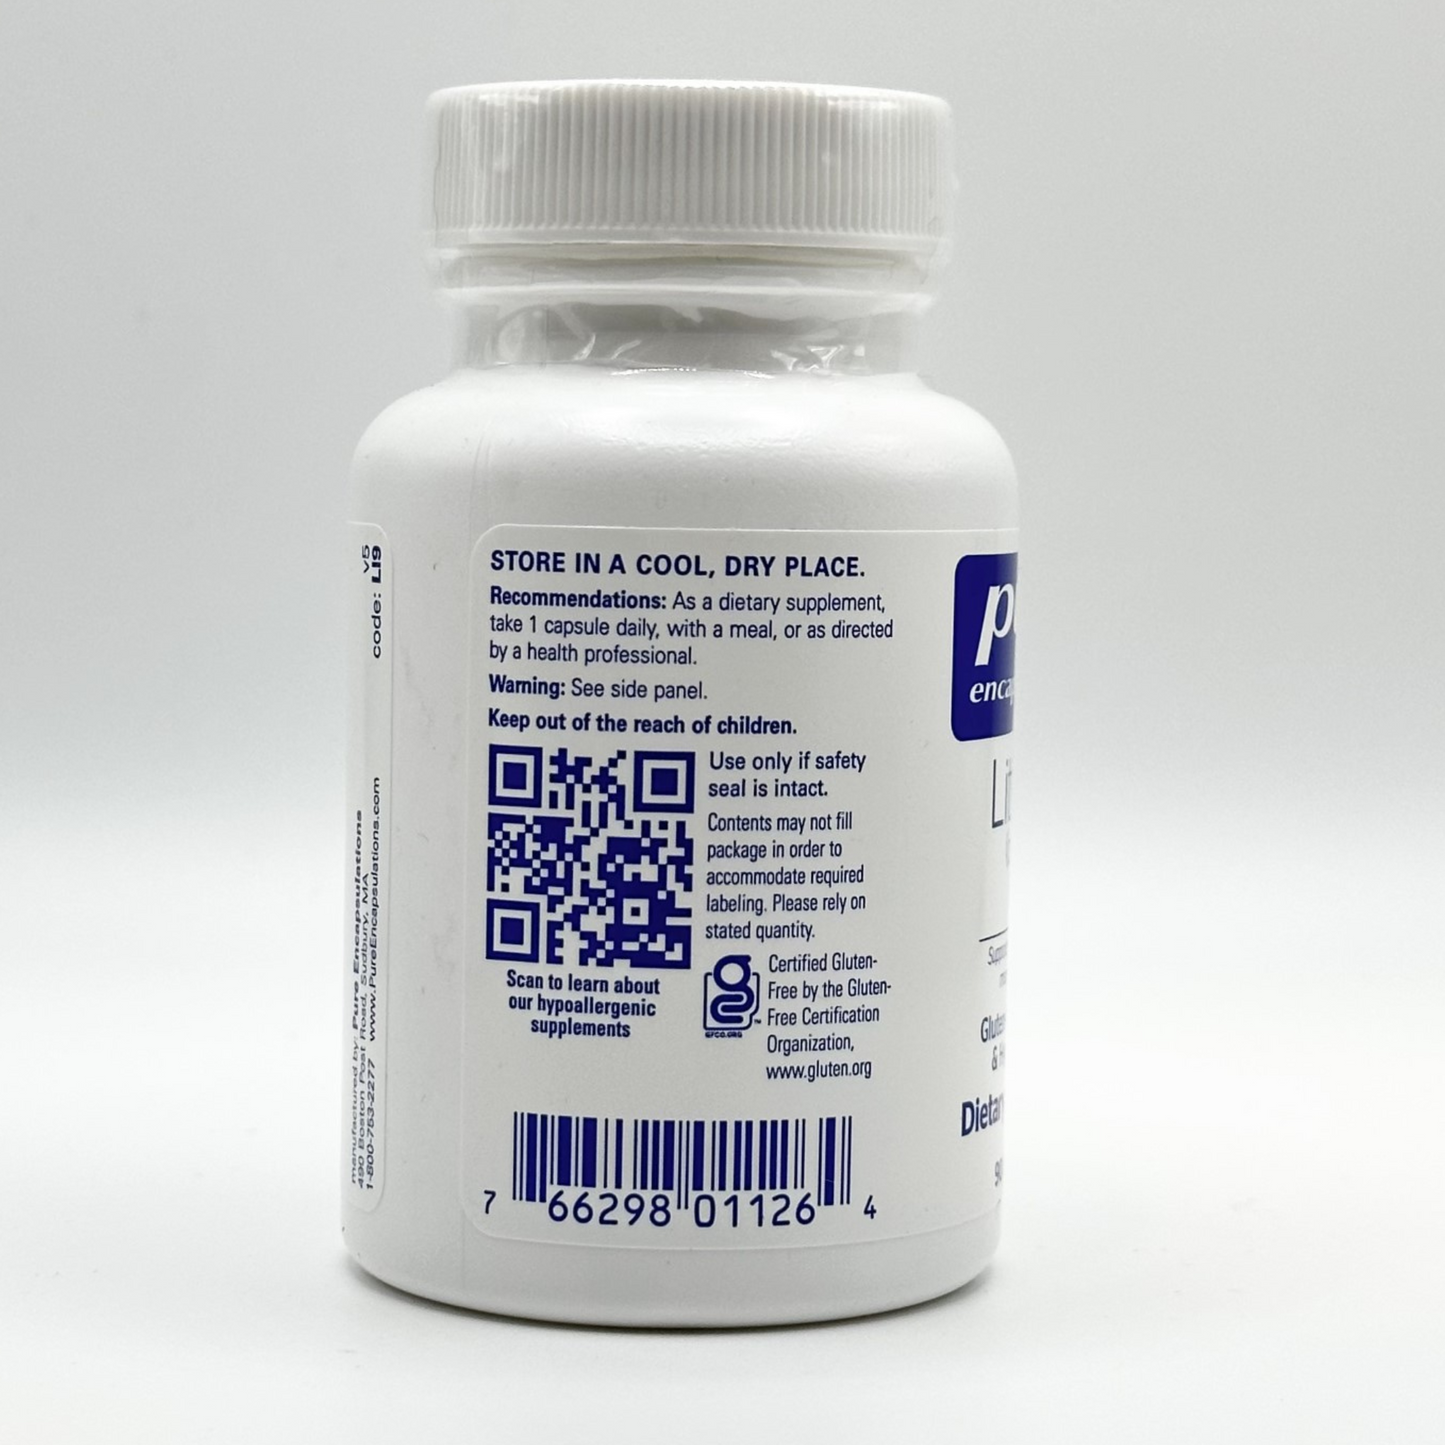 (Lithium Oroate 5mg) 90ct